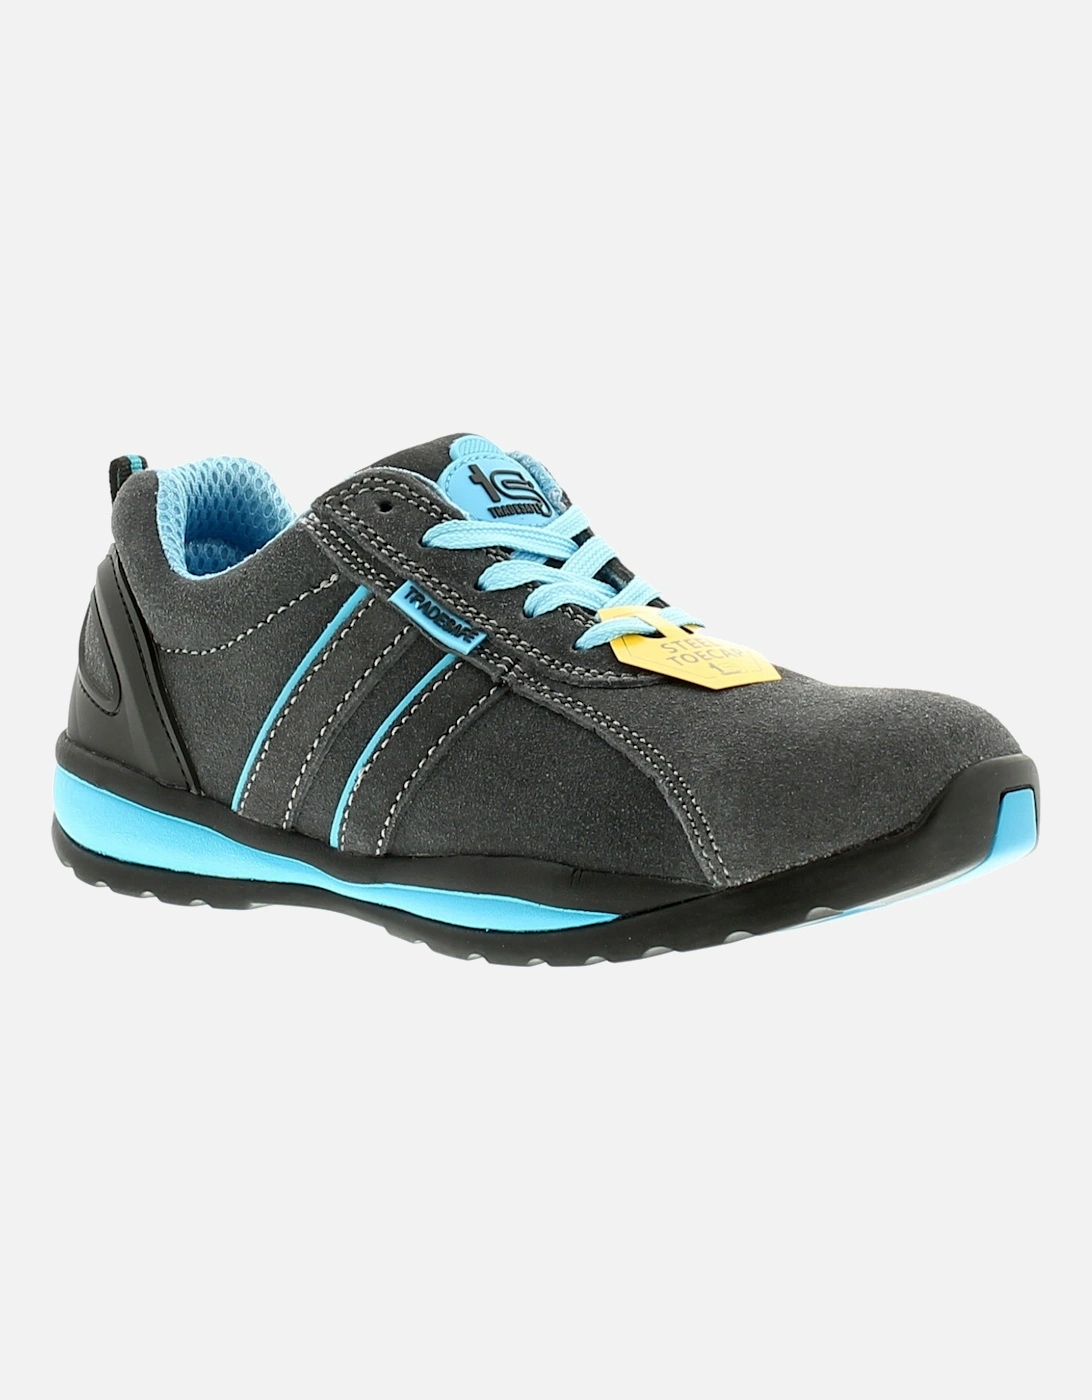 Womens Safety Trainers Barge Leather Lace Up grey blue UK Size, 6 of 5